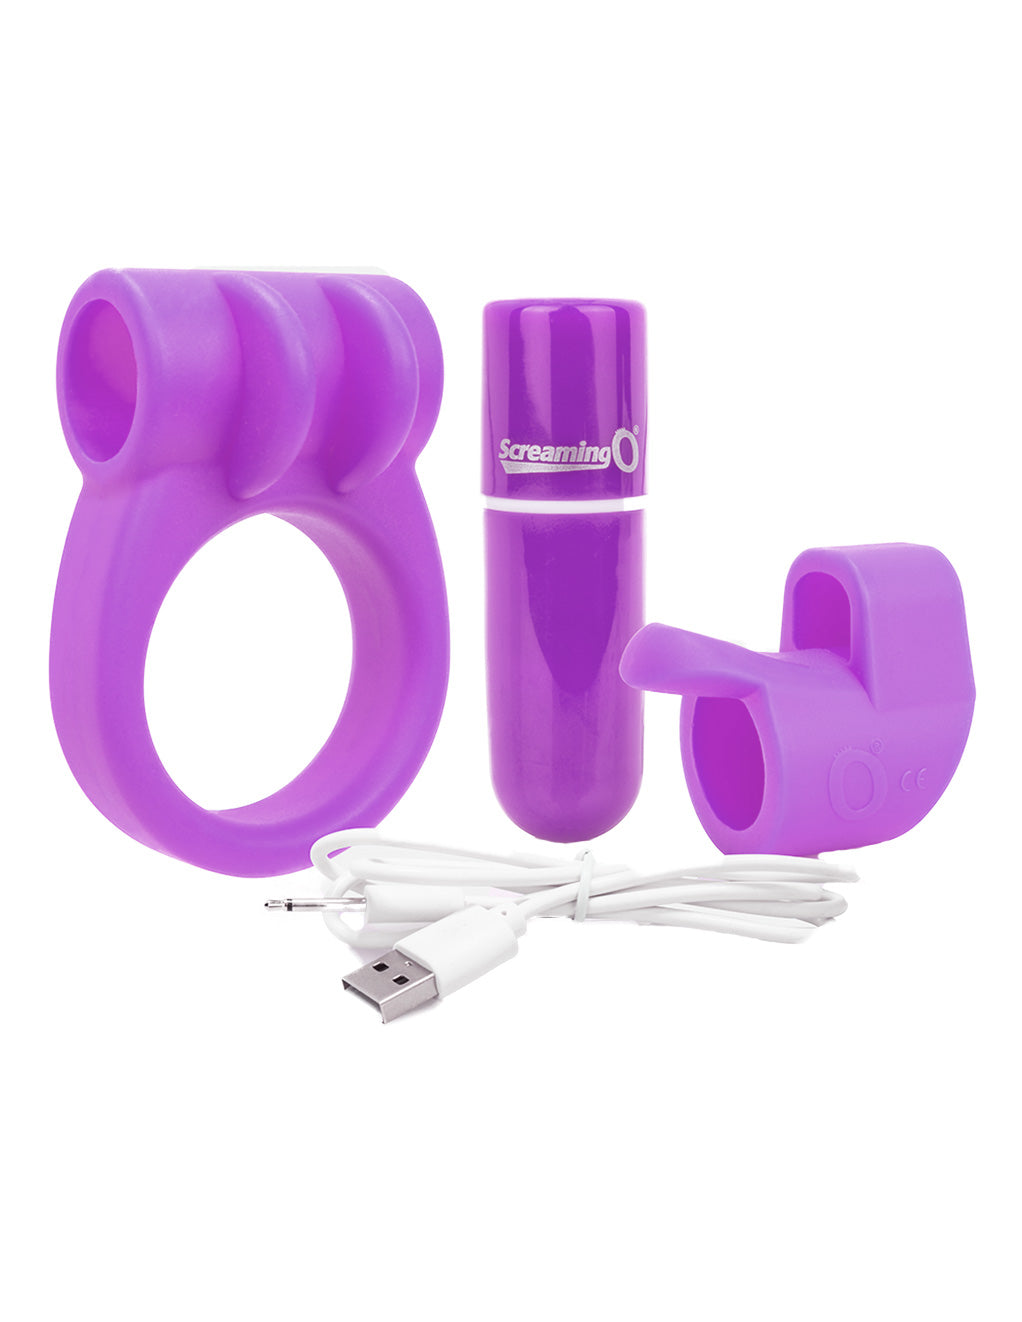 Screaming O Rechargeable Sex Toy Combo Kit #1 - Novelties - Massager